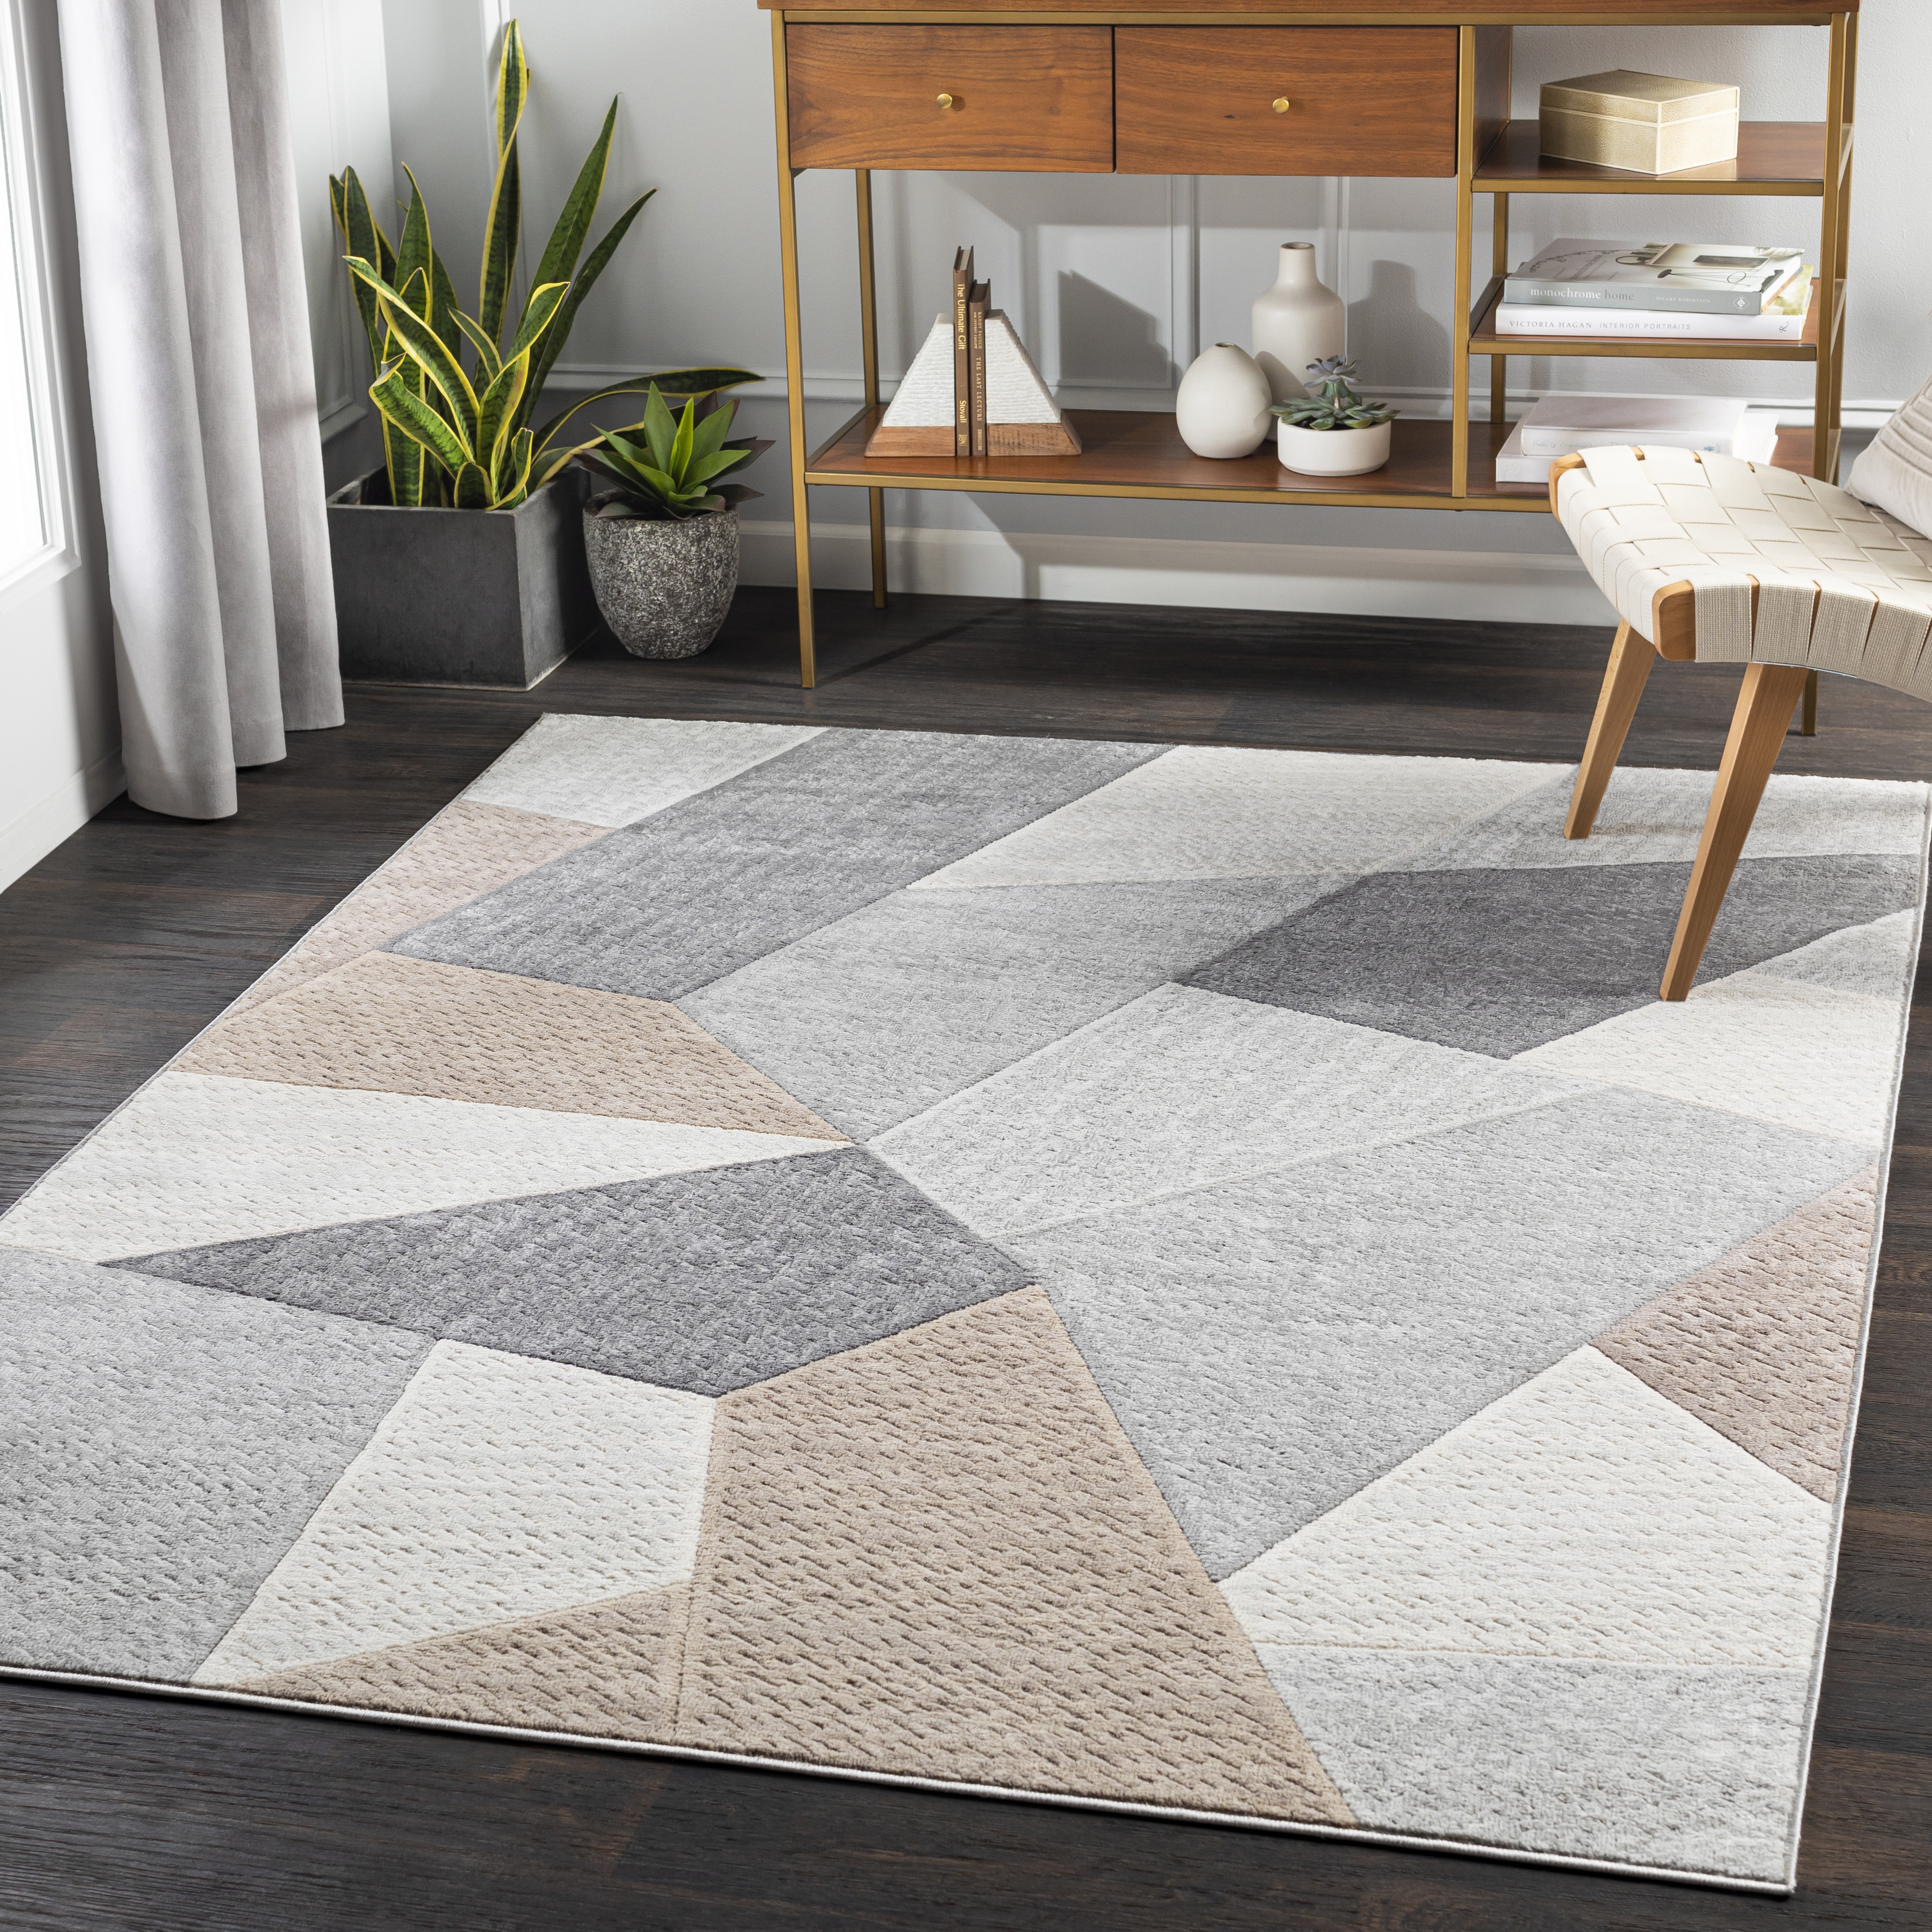 Remy Rug, 7'10" x 10' - Image 1